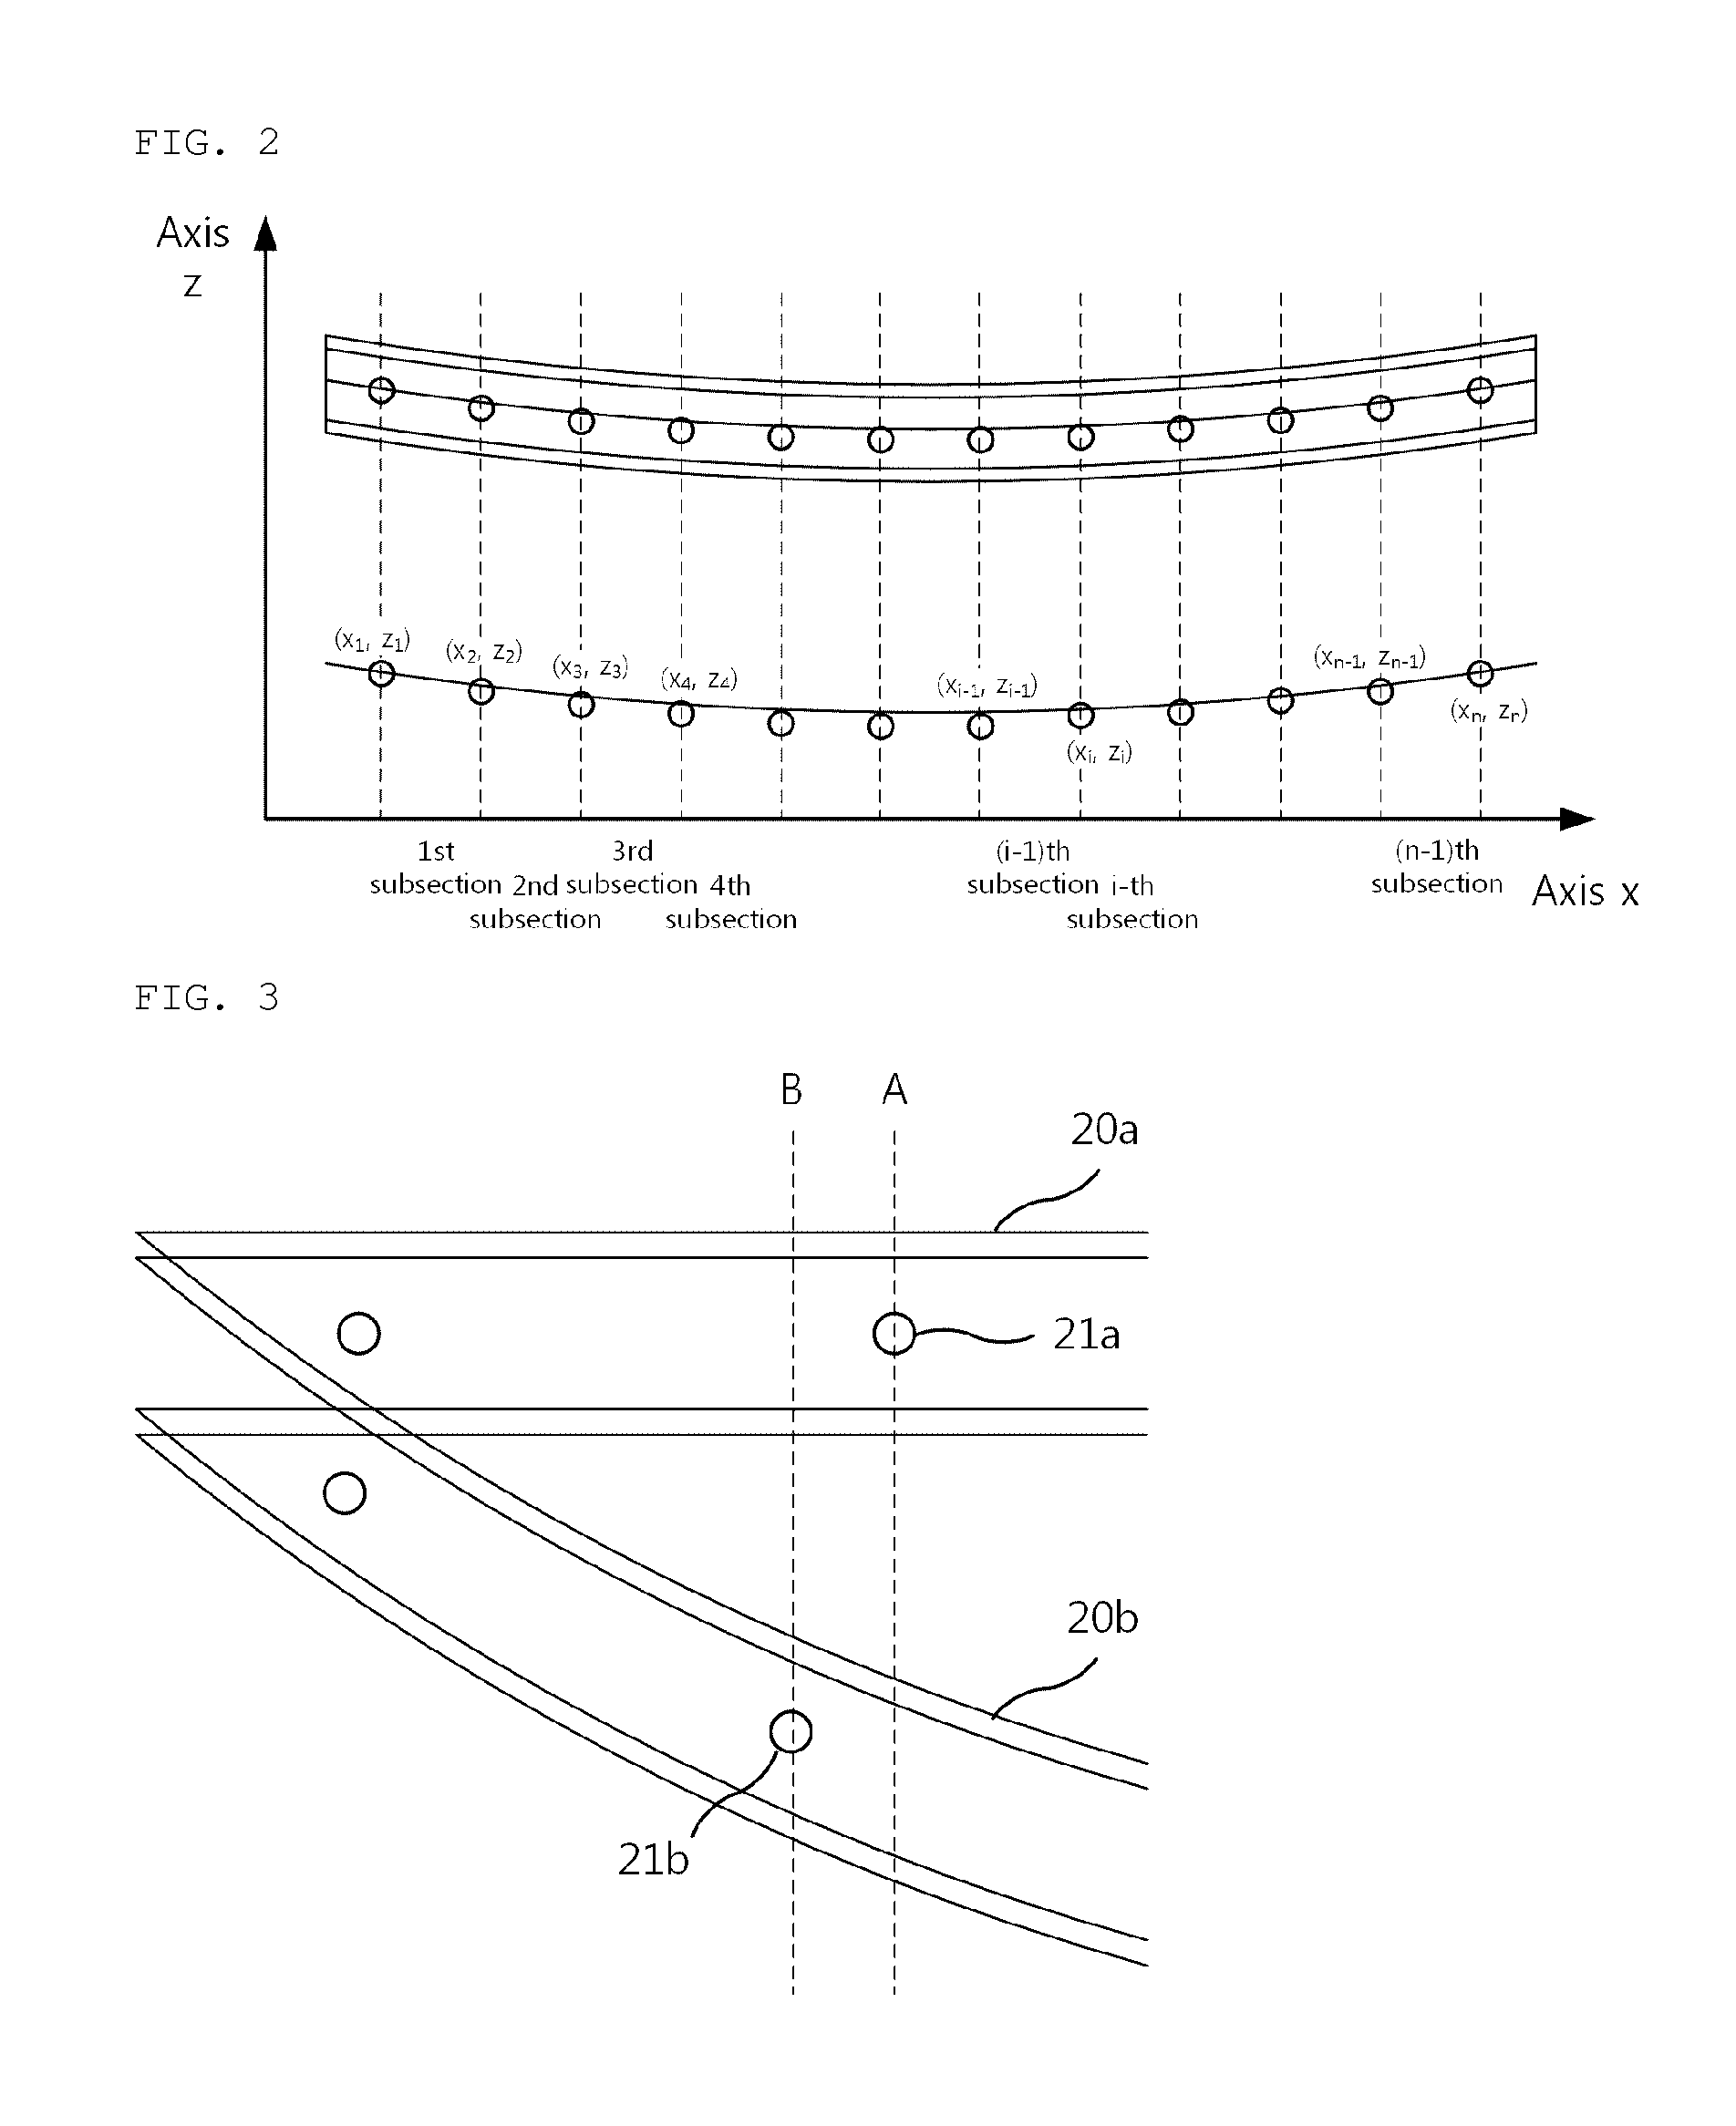 System and method for image-based structural health monitoring suitable for structures having uncertain load conditions and support conditions